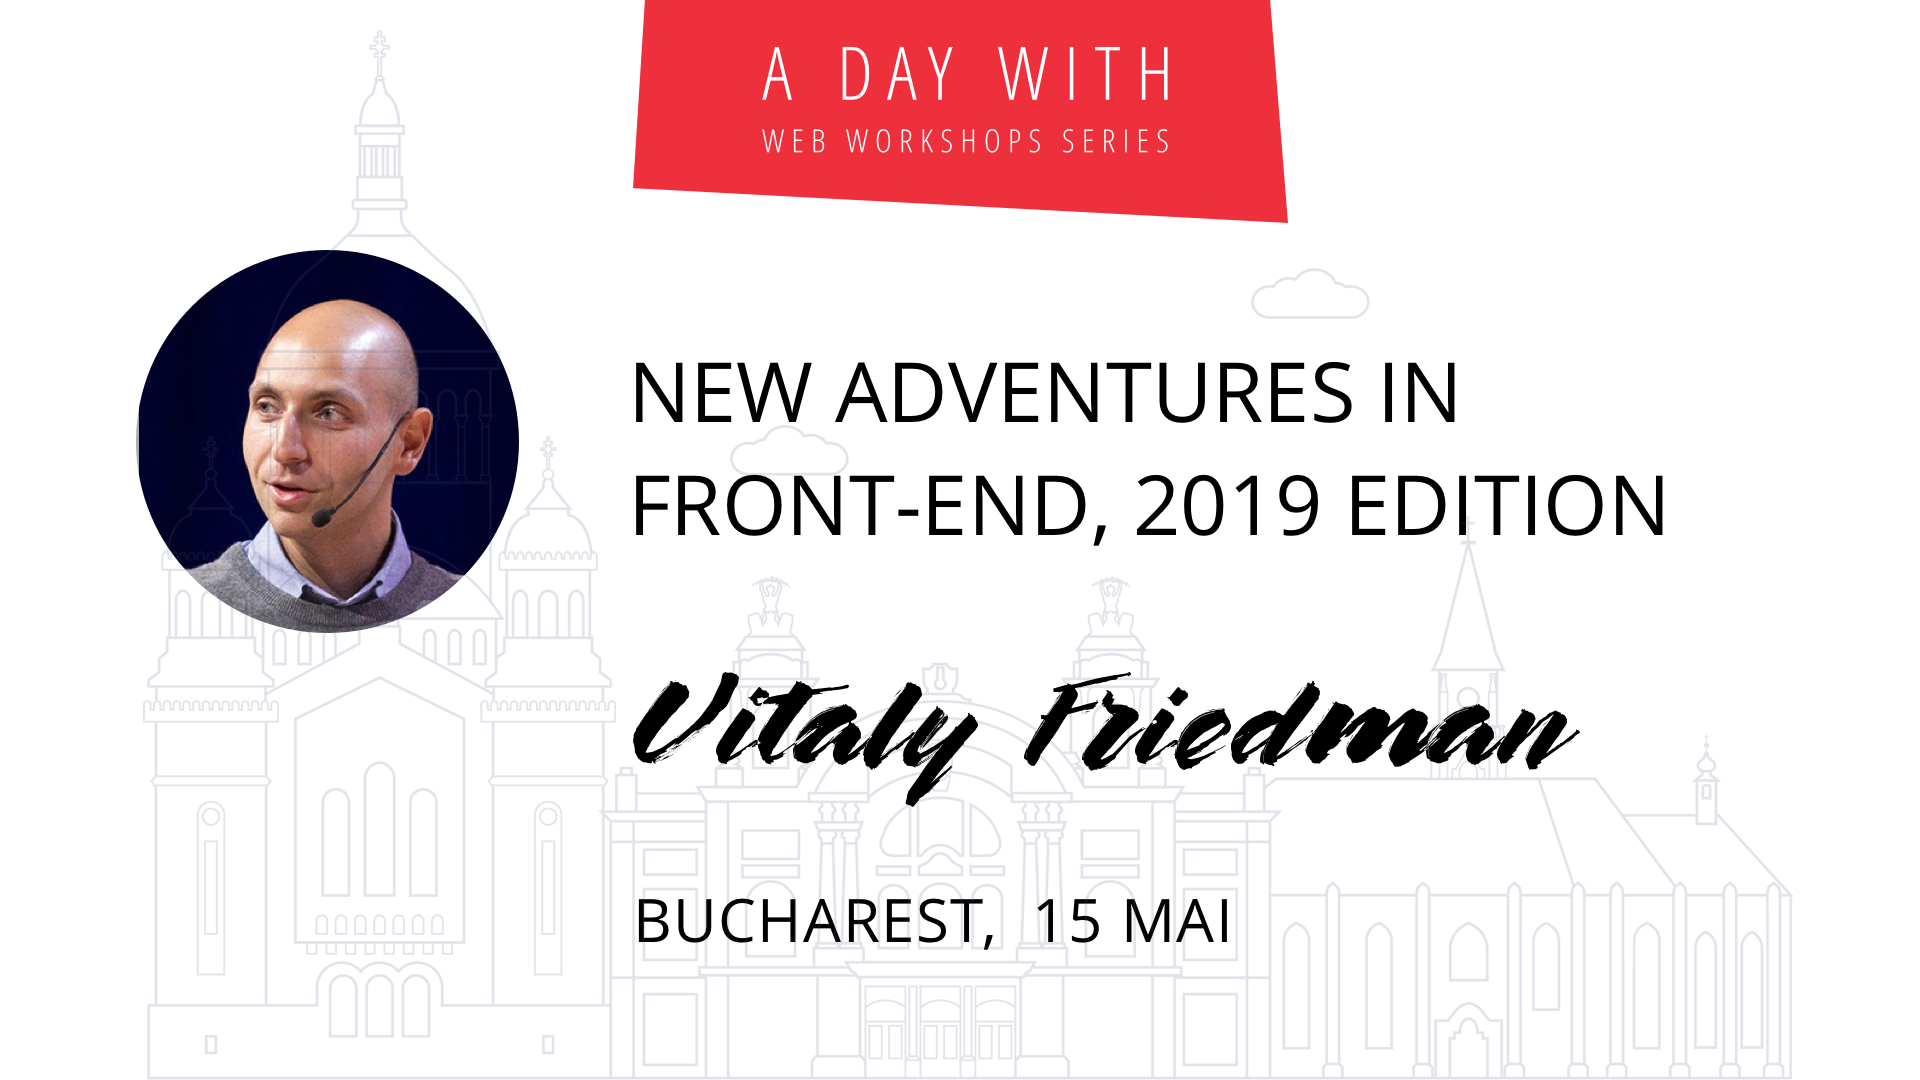 New Adventures in Front-End, 2019 Edition w/ Vitaly Friedman